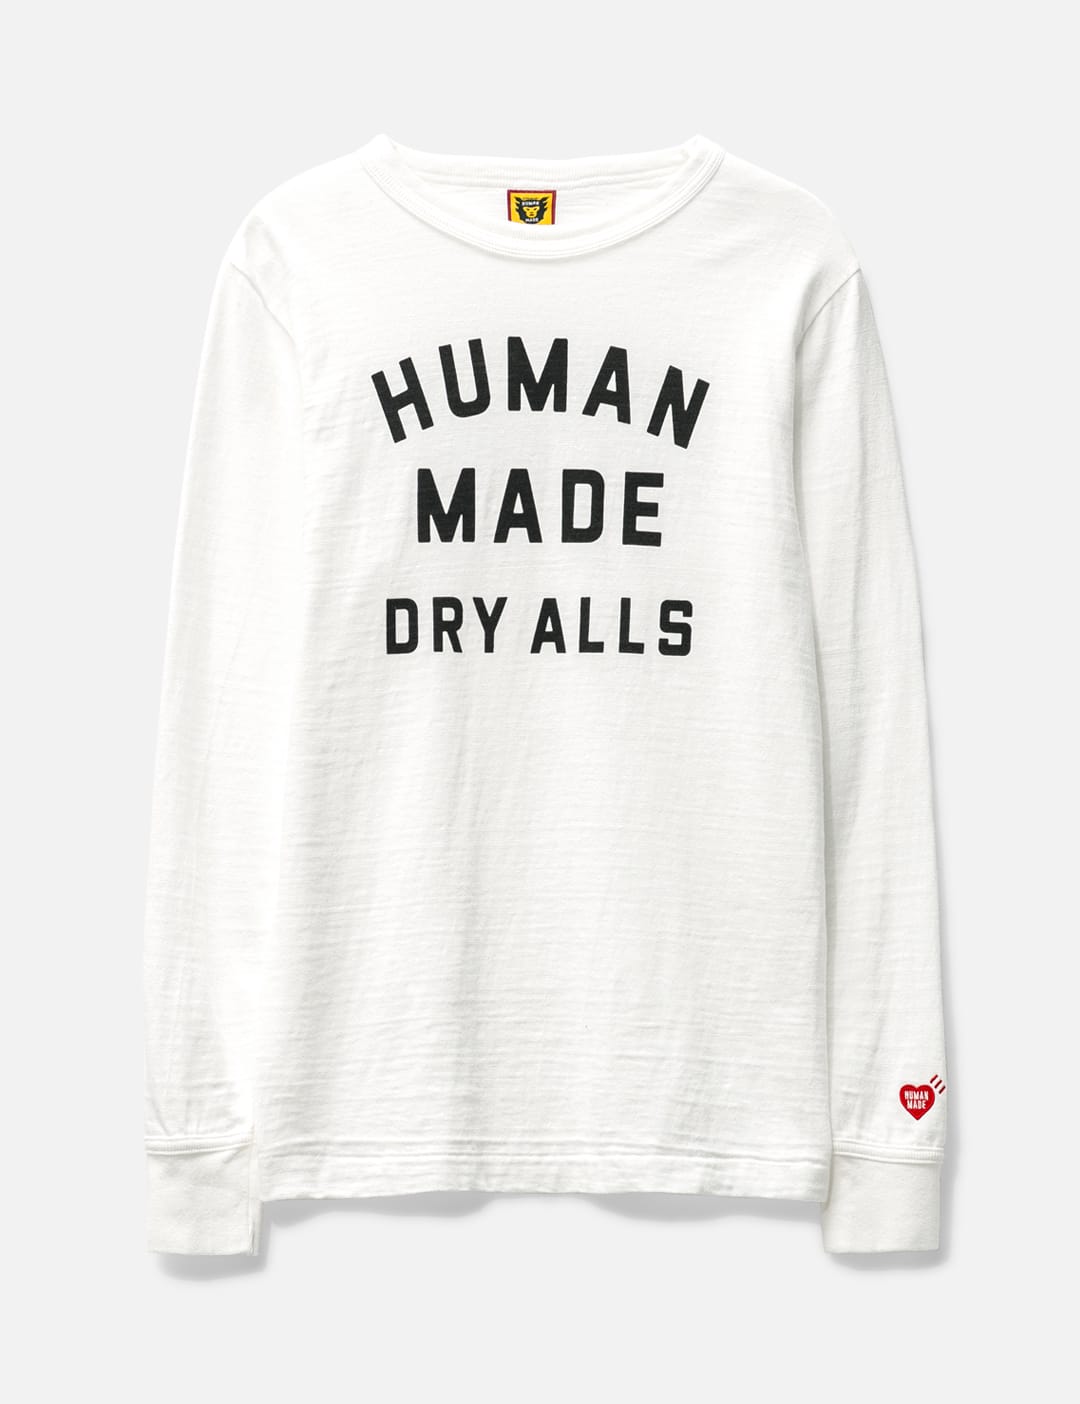 Human Made - DRY ALL LONG SLEEVES T-SHIRT | HBX - Globally Curated 